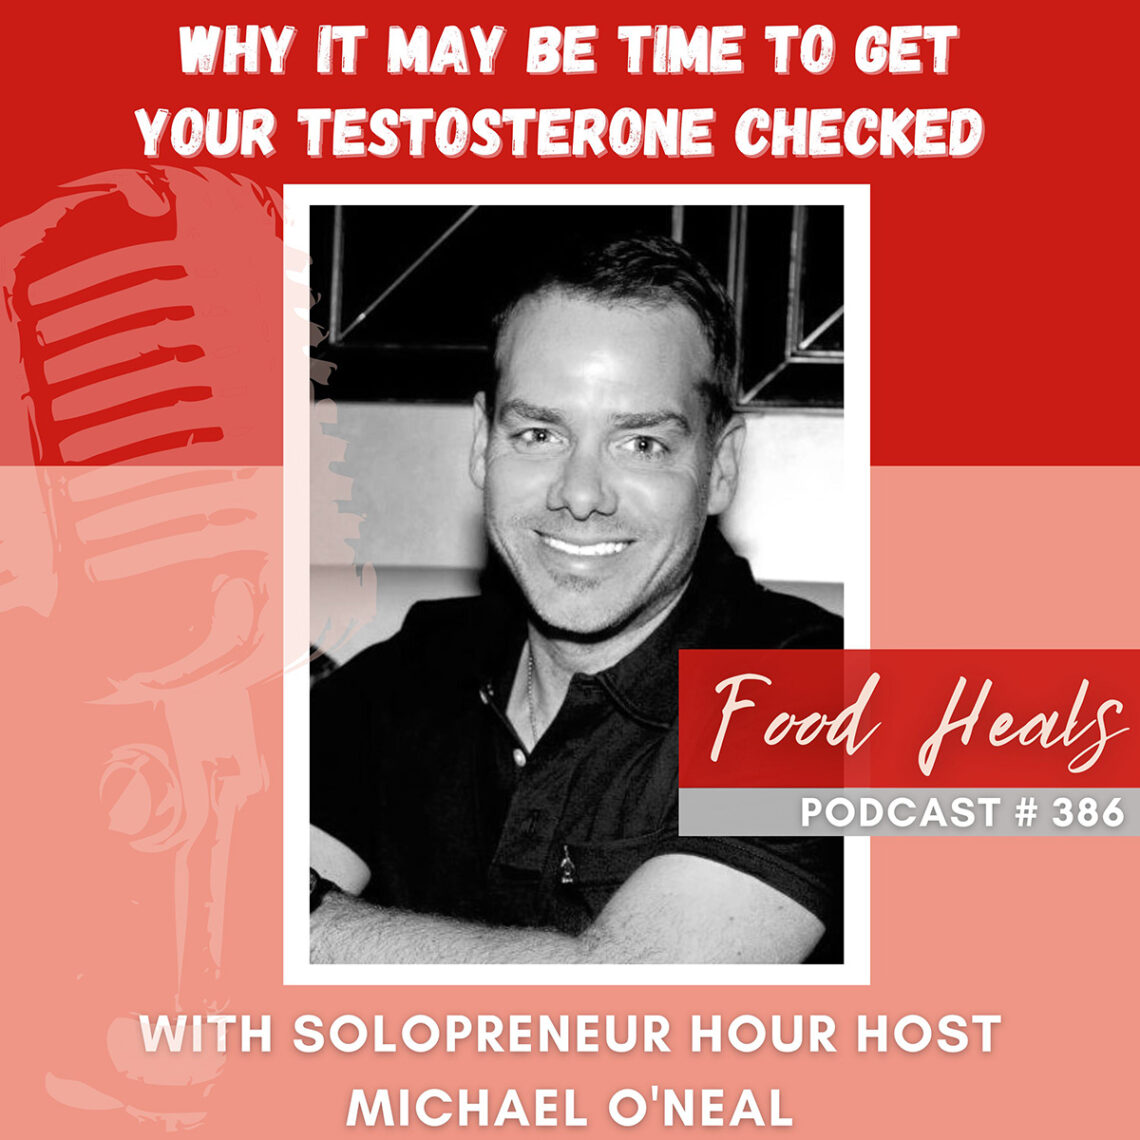 Allison Melody and Solopreneur Hour Host Michael O'Neal discuss Why It May Time to Get Your Testosterone Checked on The Food Heals Podcast.